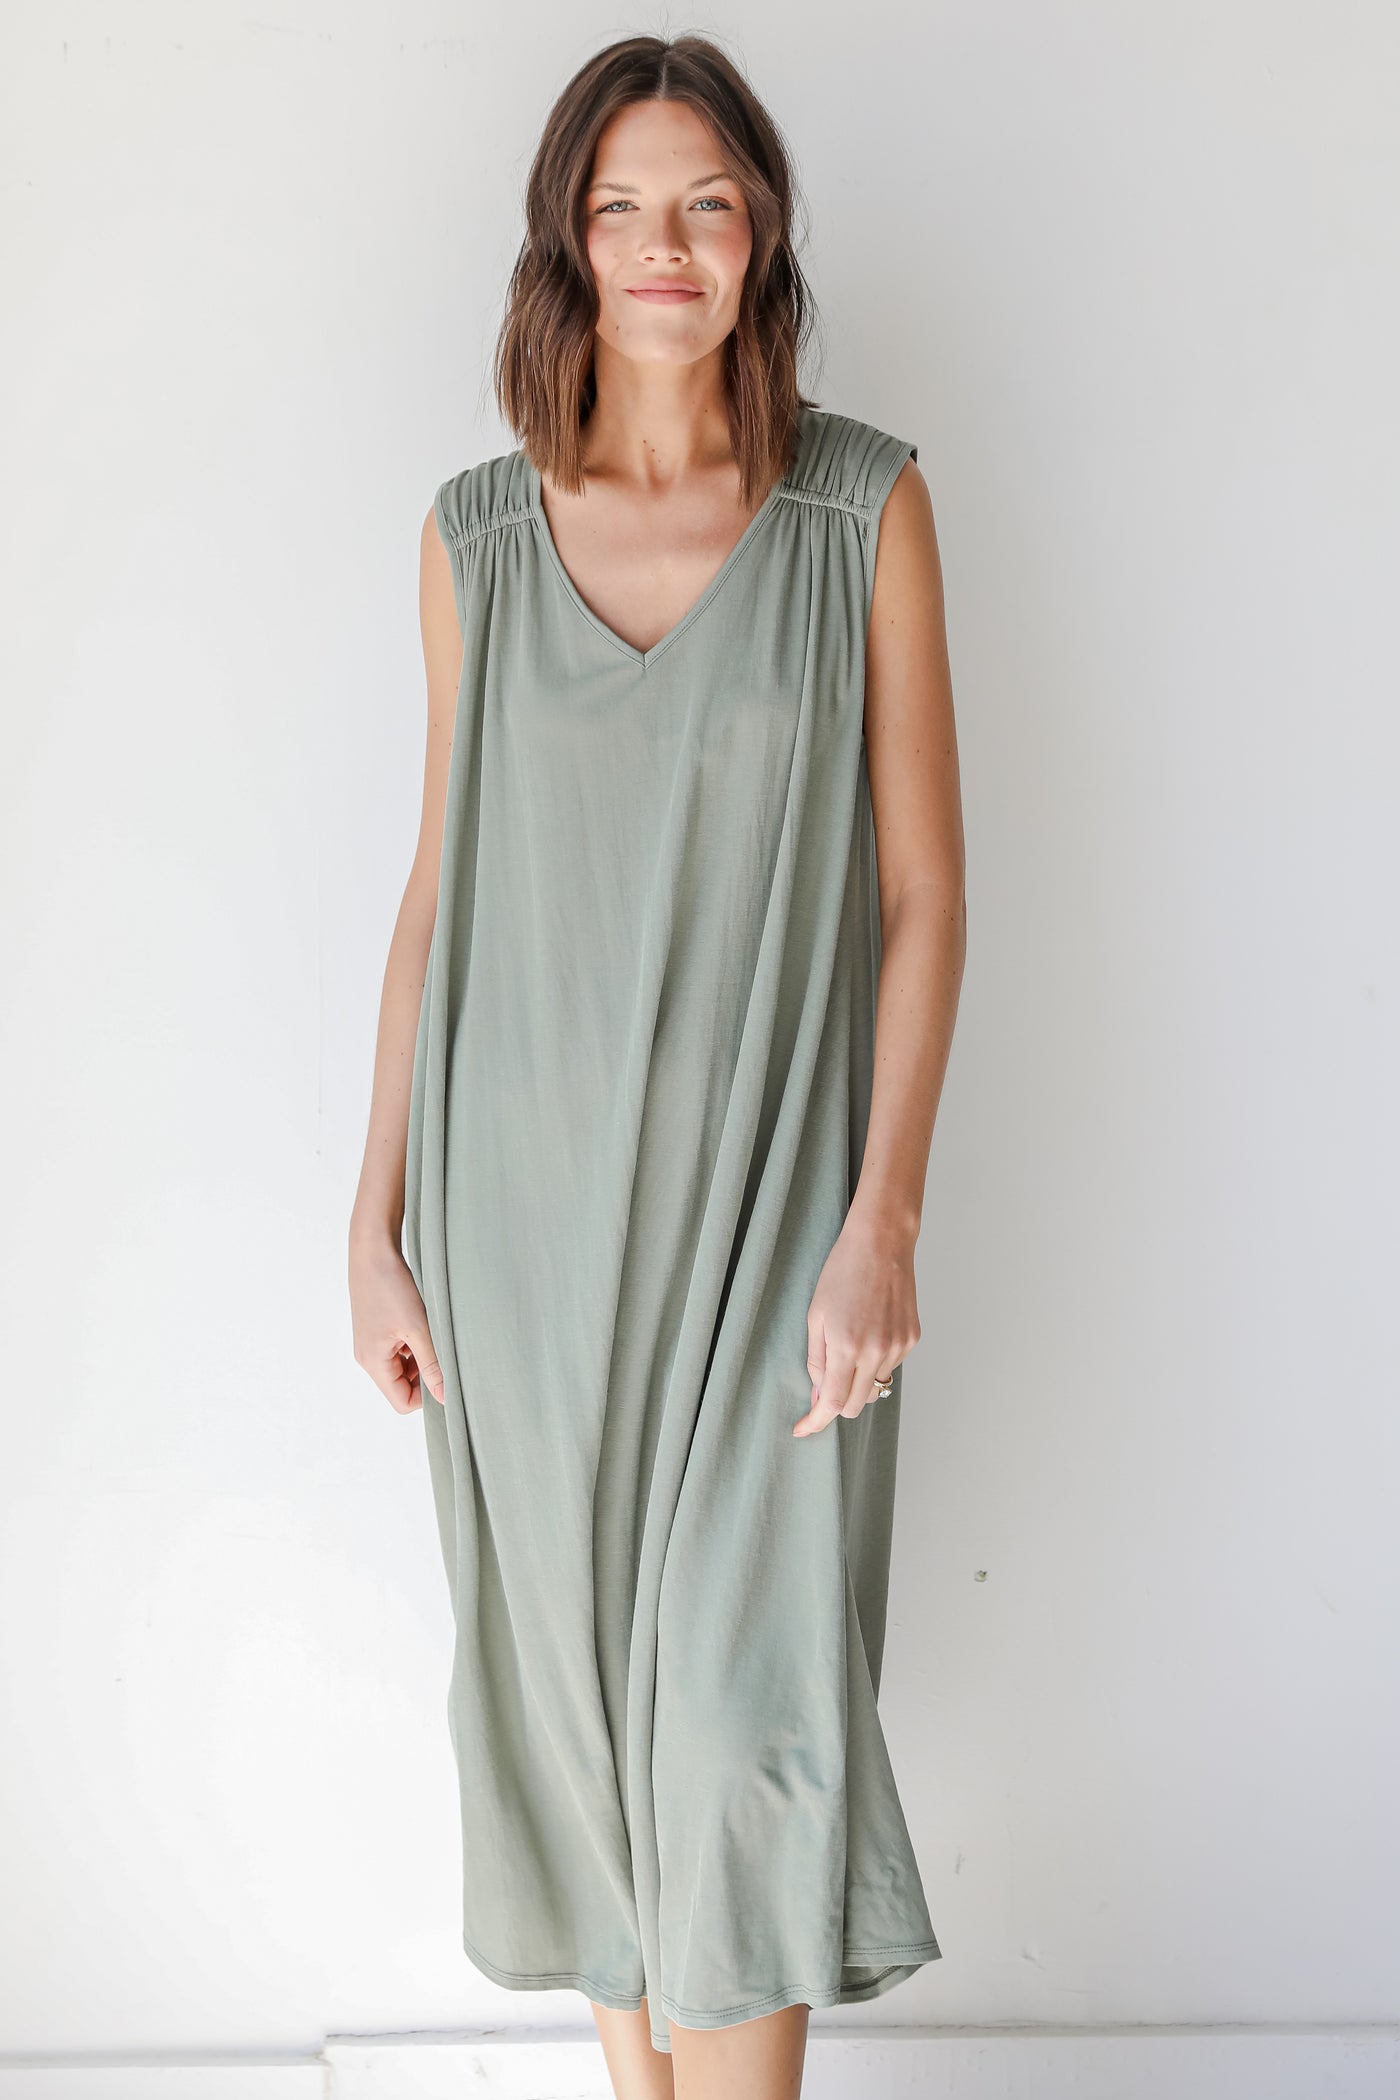 Maxi Dress in sage on model